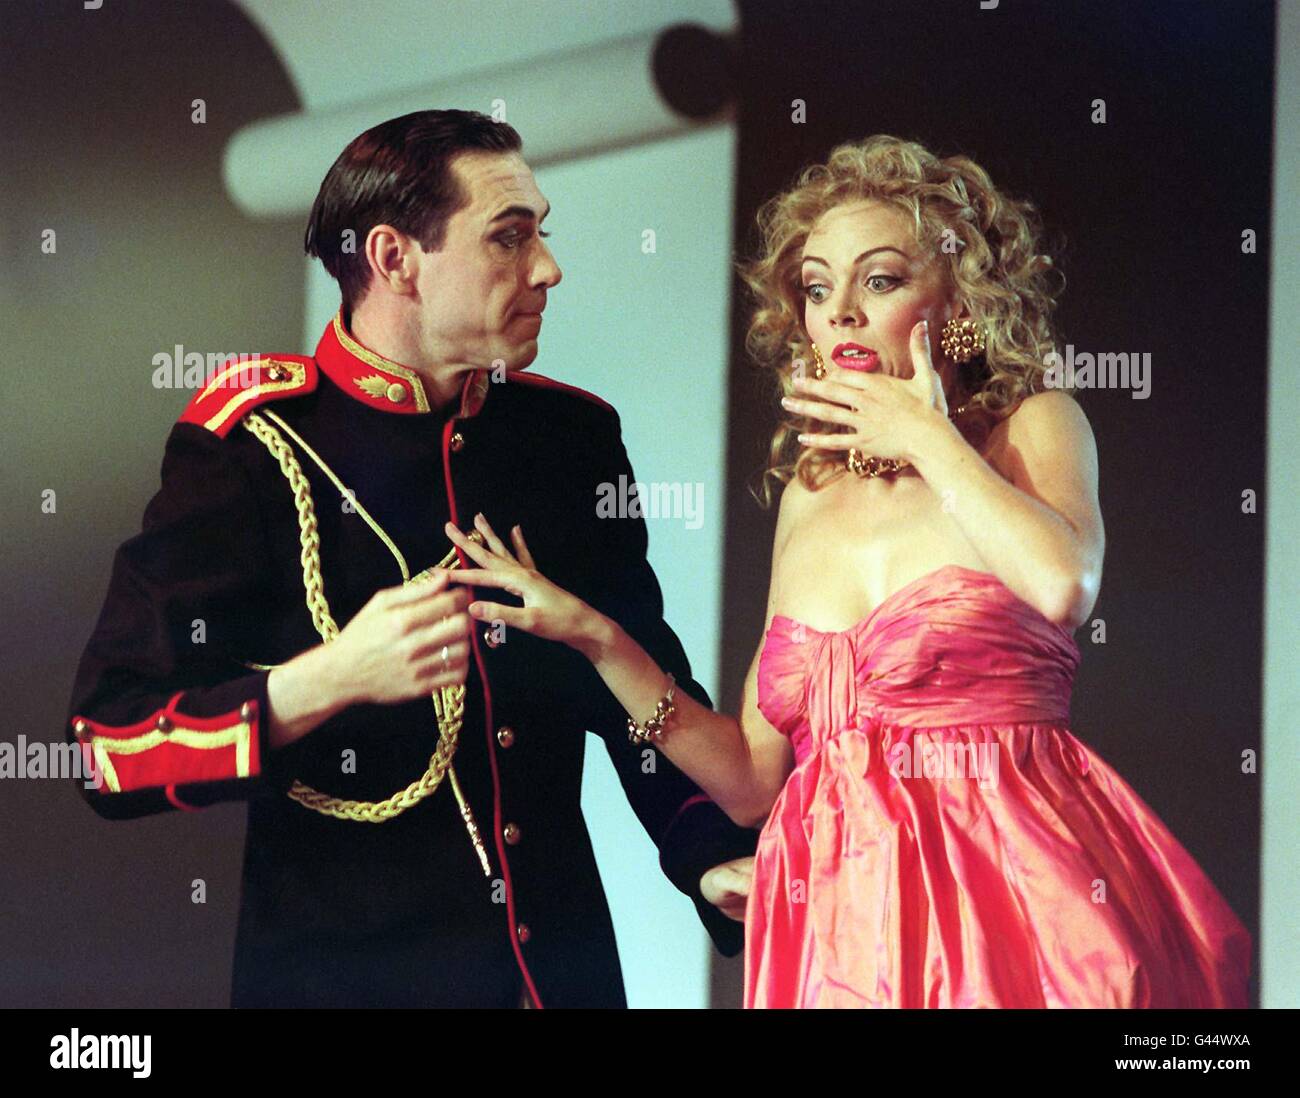 The Piccadilly Theatre in London's West End staged a dress rehearsal for 'Swan Lake' last evening (Saturday). A scene with the Prince (Scott Ambler) and his girlfriend (Emily Piercy. Photo by Jeff Gilbert/PA. Stock Photo